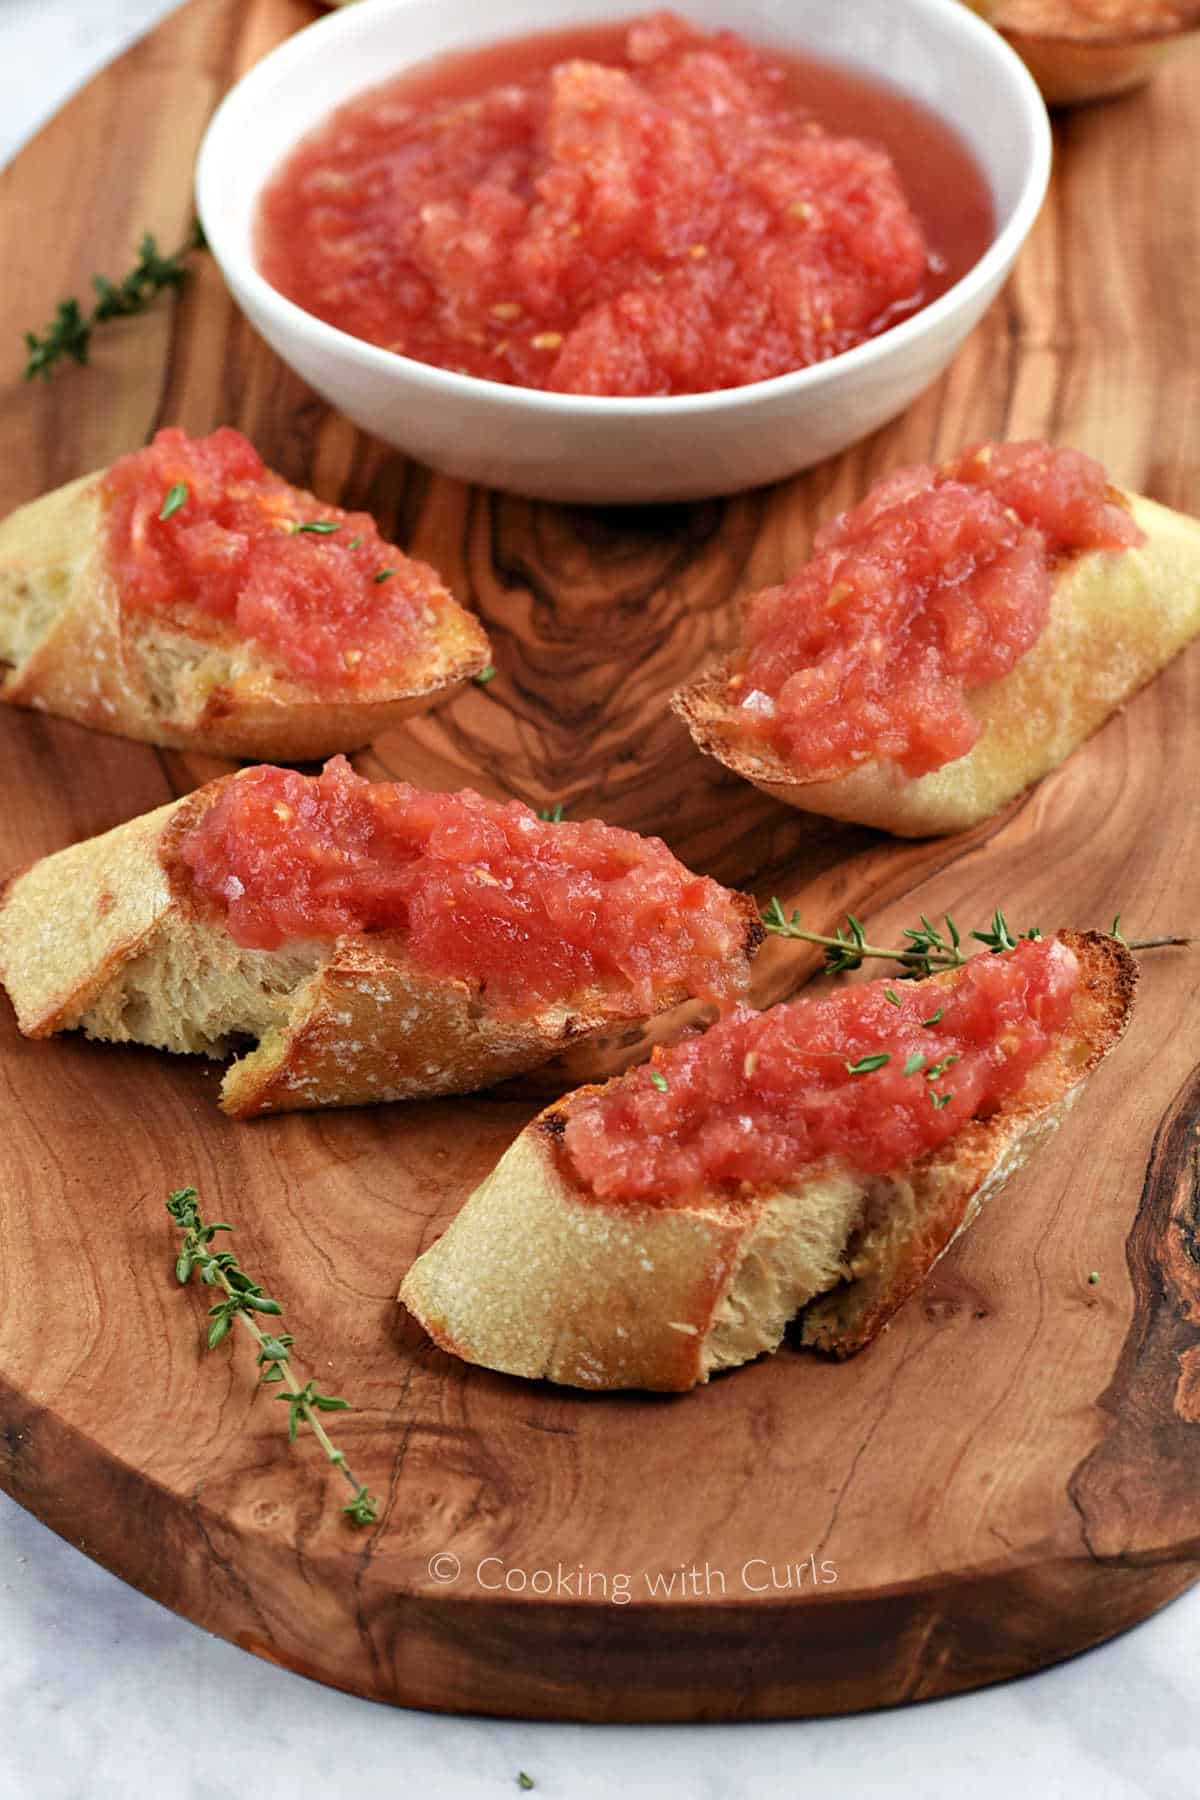 Thick toasted bread slices topped with grated fresh tomato.